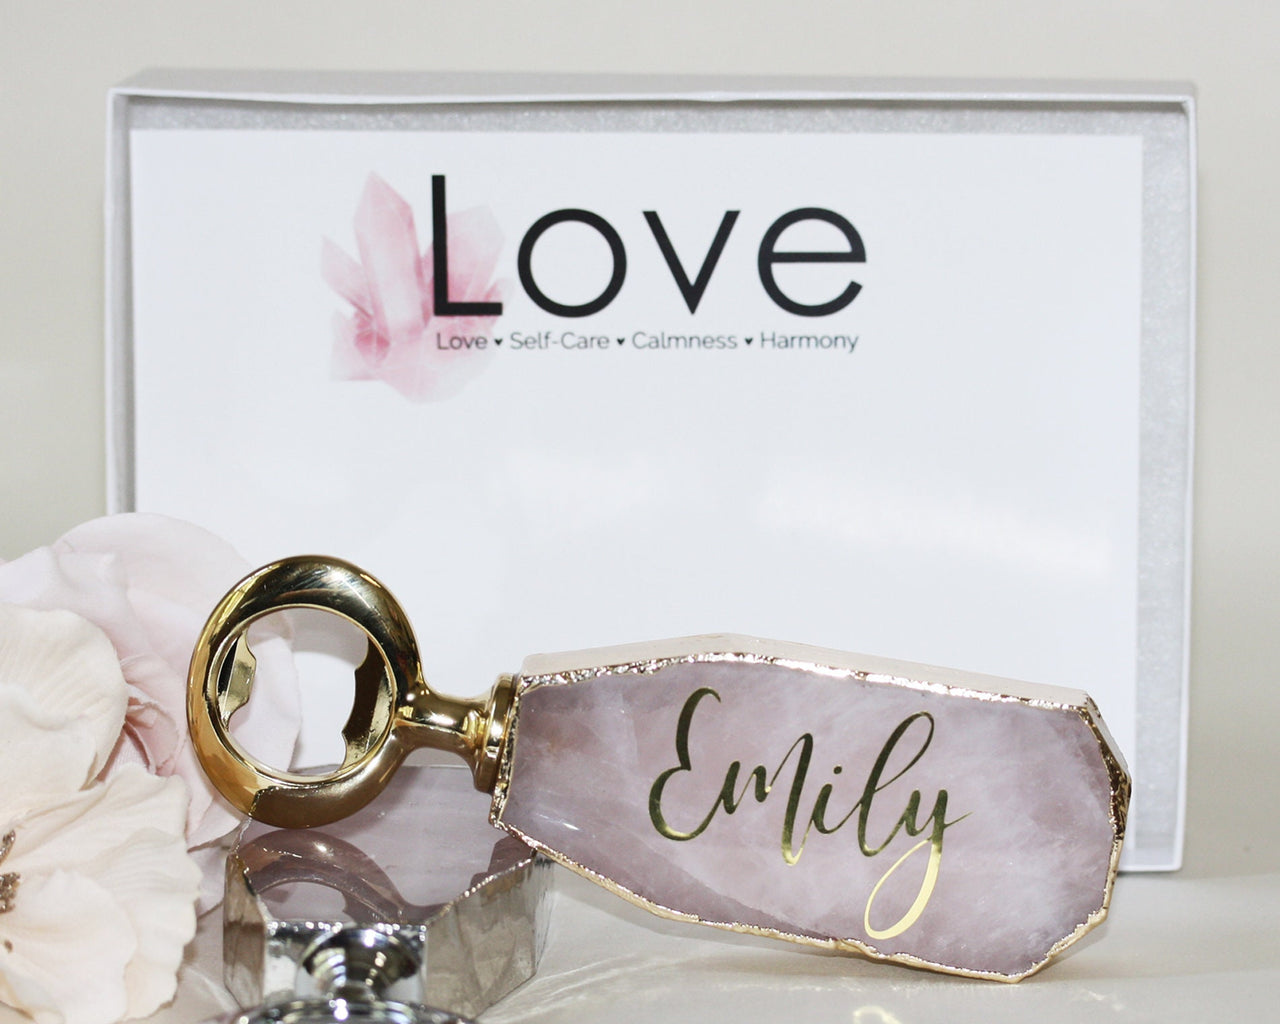 Personalized Bridesmaid Gifts Gemstone Rose Quartz Bottle opener Proposal box, Luxury Gift for Maid of honor, bride, mother of bride groom